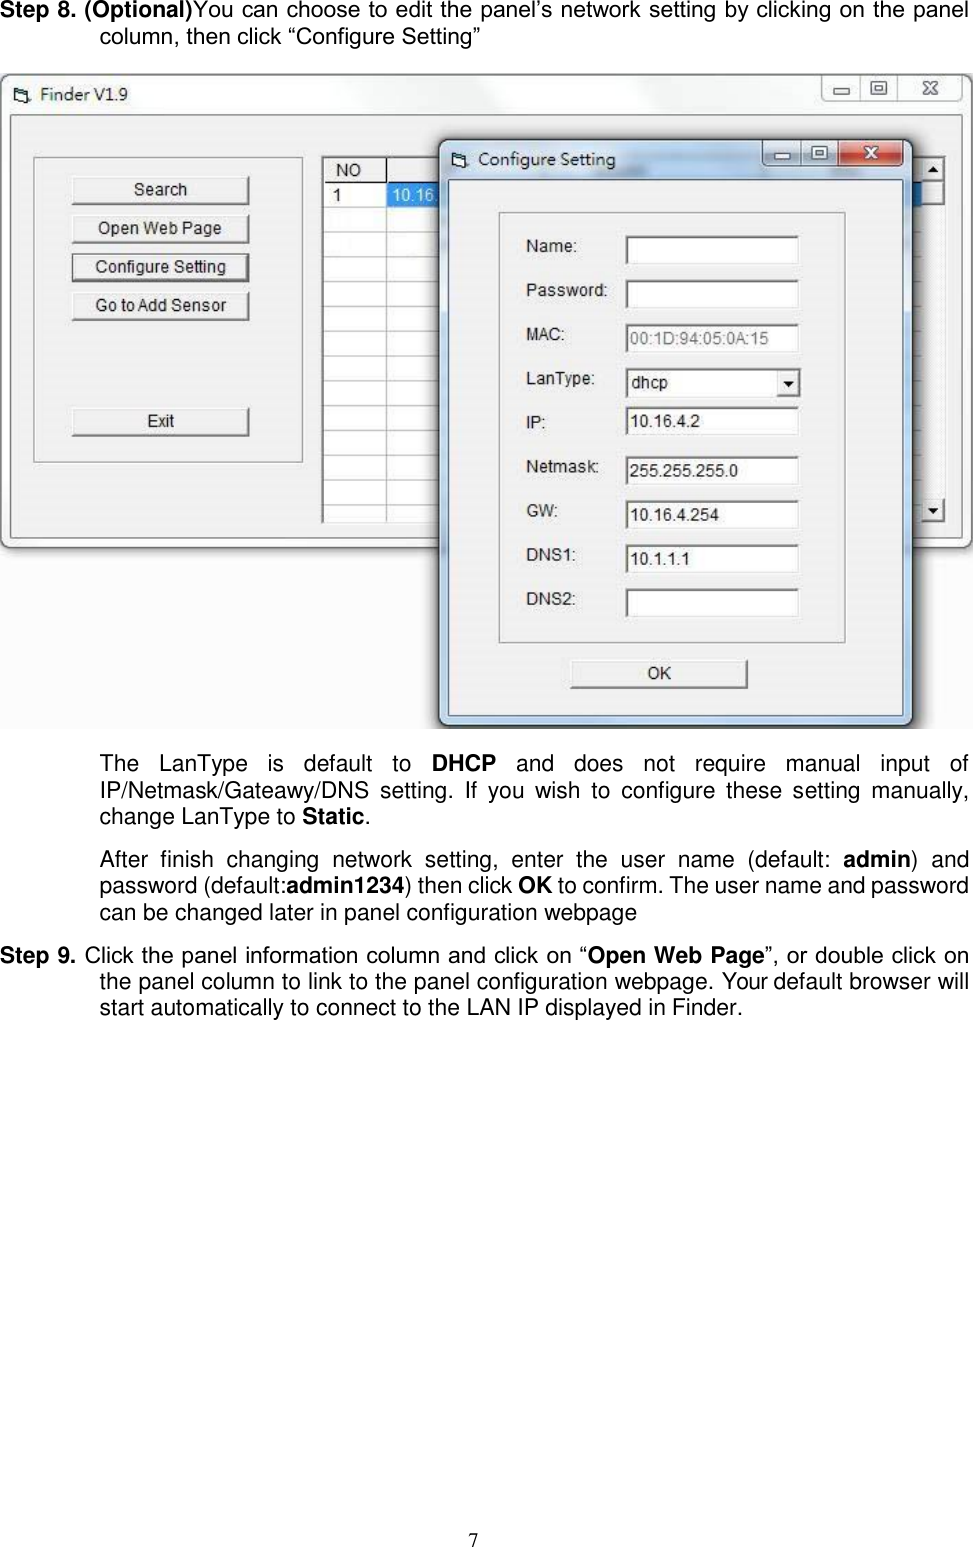 7  Step 8. (Optional)You can choose to edit the panel’s network setting by clicking on the panel column, then click “Configure Setting”  The  LanType  is  default  to  DHCP  and  does  not  require  manual  input  of IP/Netmask/Gateawy/DNS  setting.  If  you  wish  to  configure  these  setting  manually, change LanType to Static. After  finish  changing  network  setting,  enter  the  user  name  (default:  admin)  and password (default:admin1234) then click OK to confirm. The user name and password can be changed later in panel configuration webpage Step 9. Click the panel information column and click on “Open Web Page”, or double click on the panel column to link to the panel configuration webpage. Your default browser will start automatically to connect to the LAN IP displayed in Finder. 